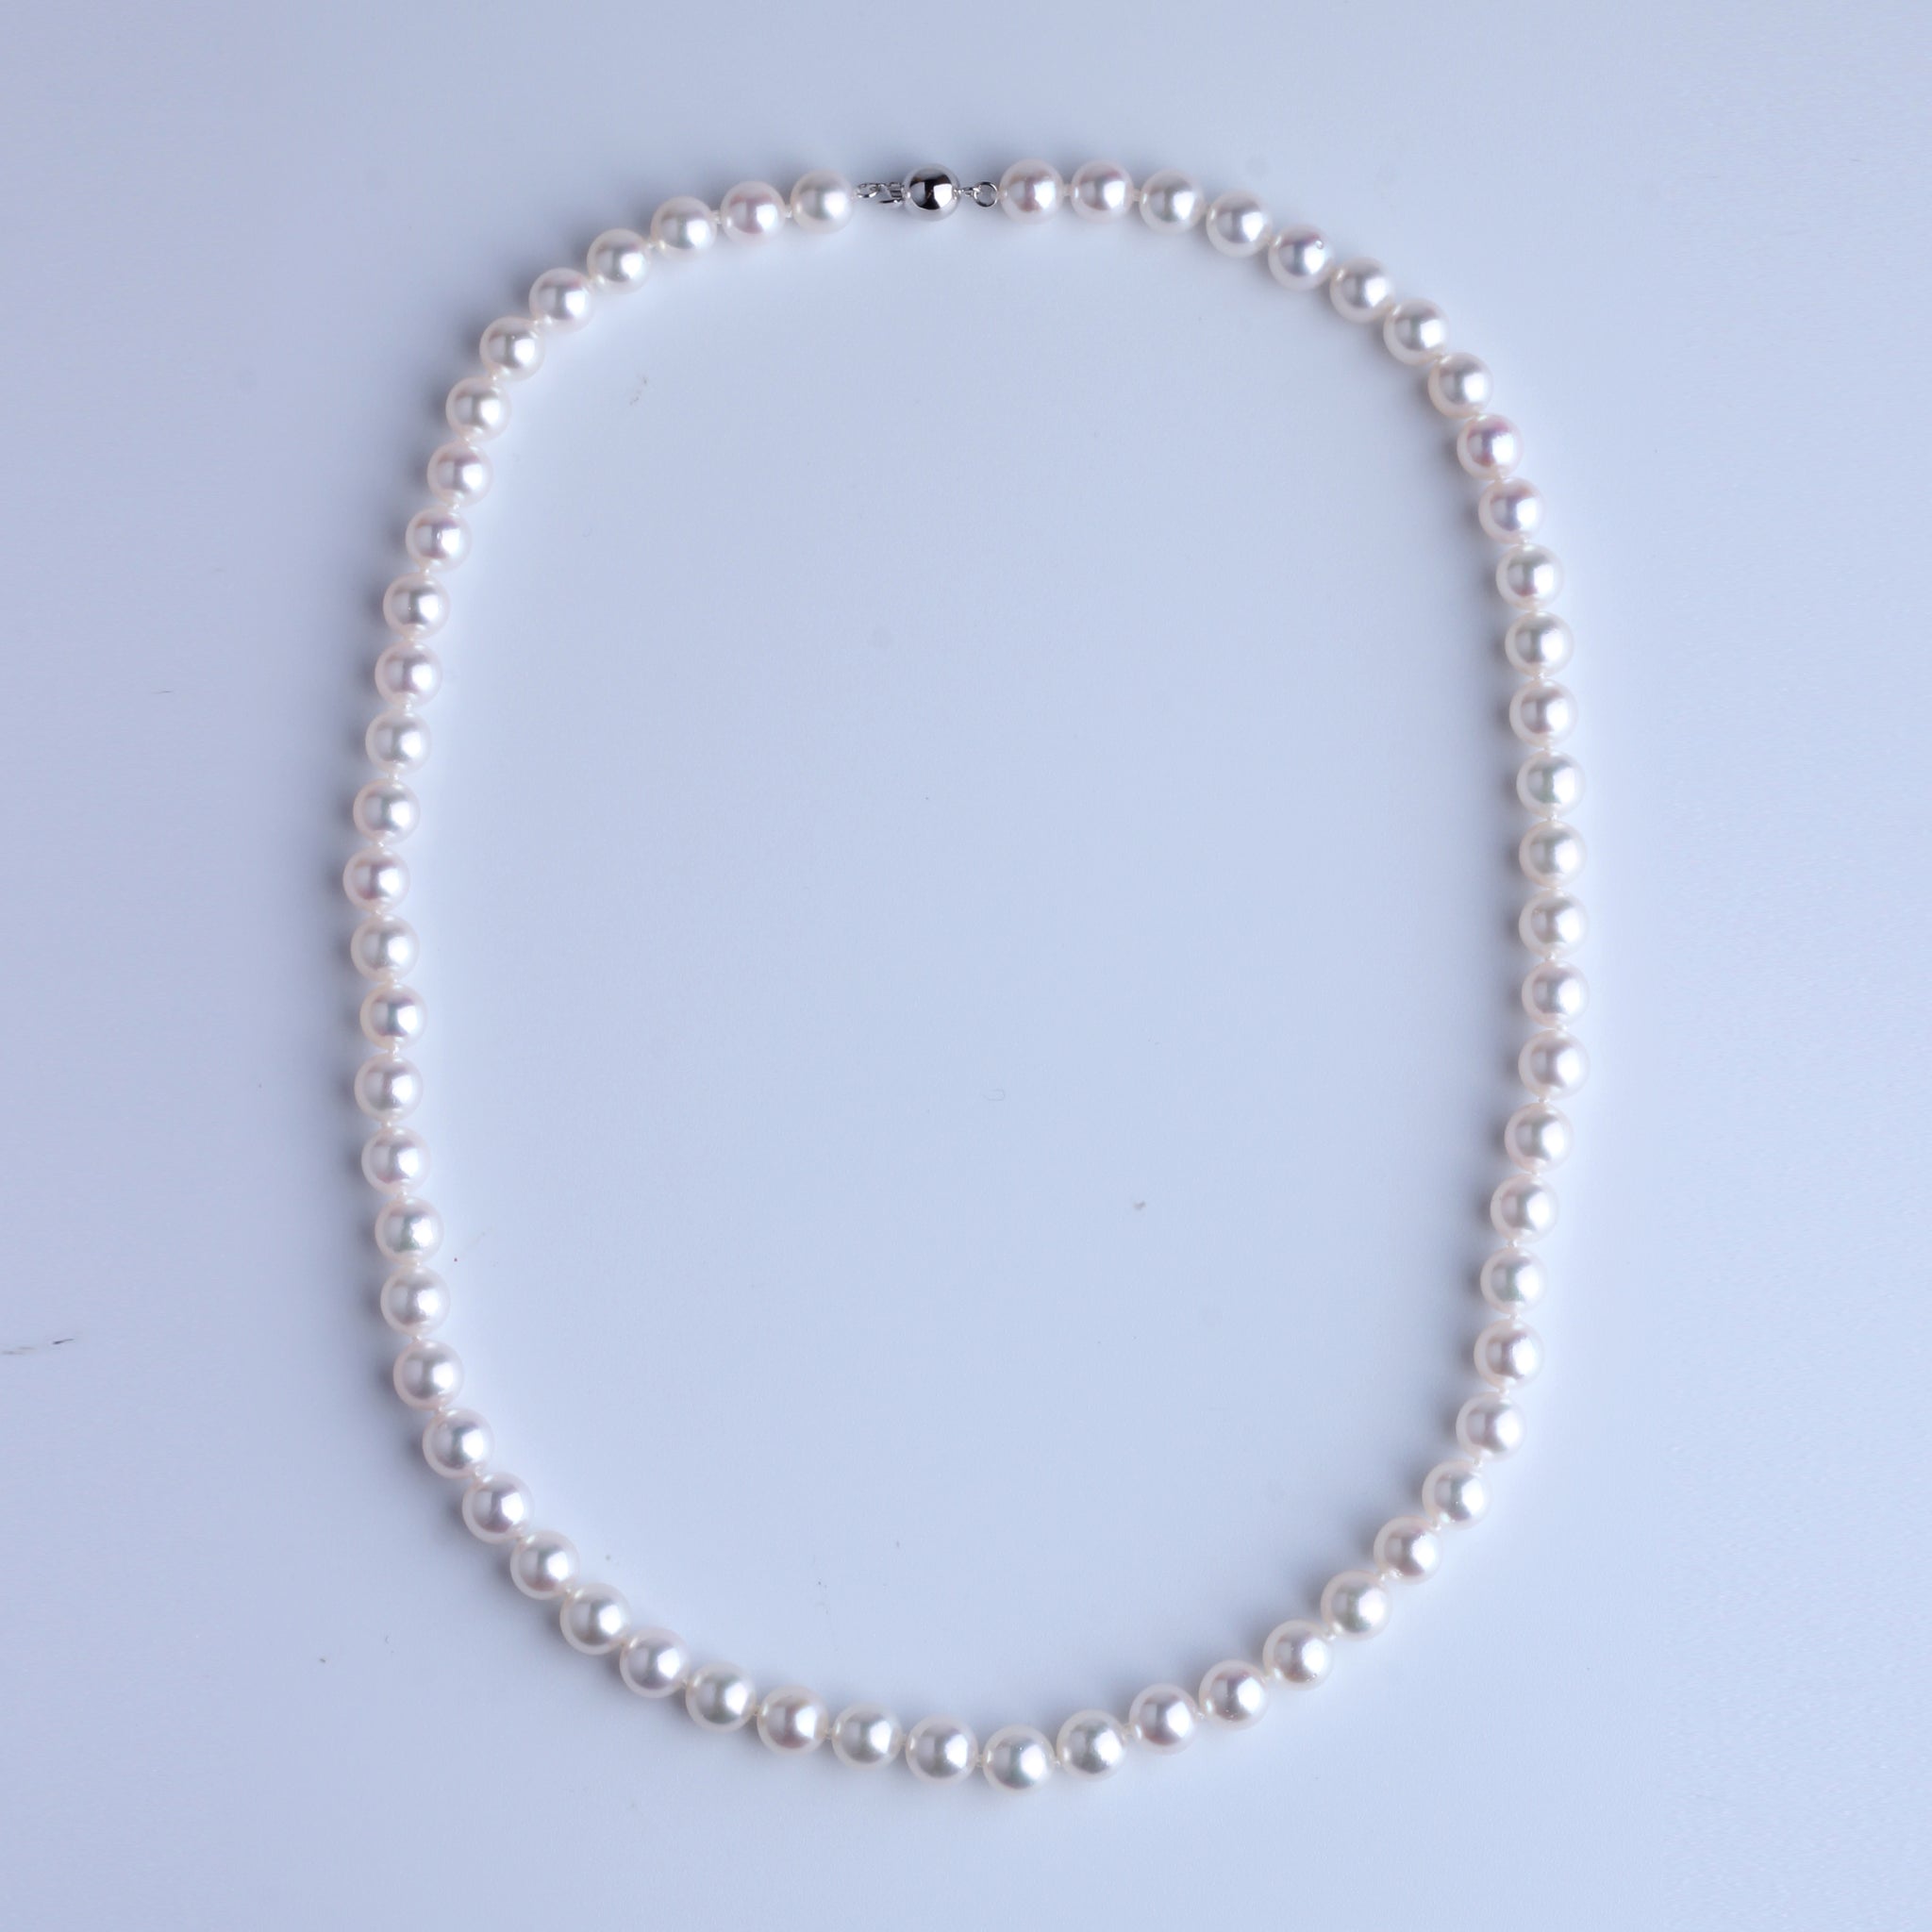 Japan Akoya Pearl Necklace 6.5-7mm - Woment Designer Jewelry